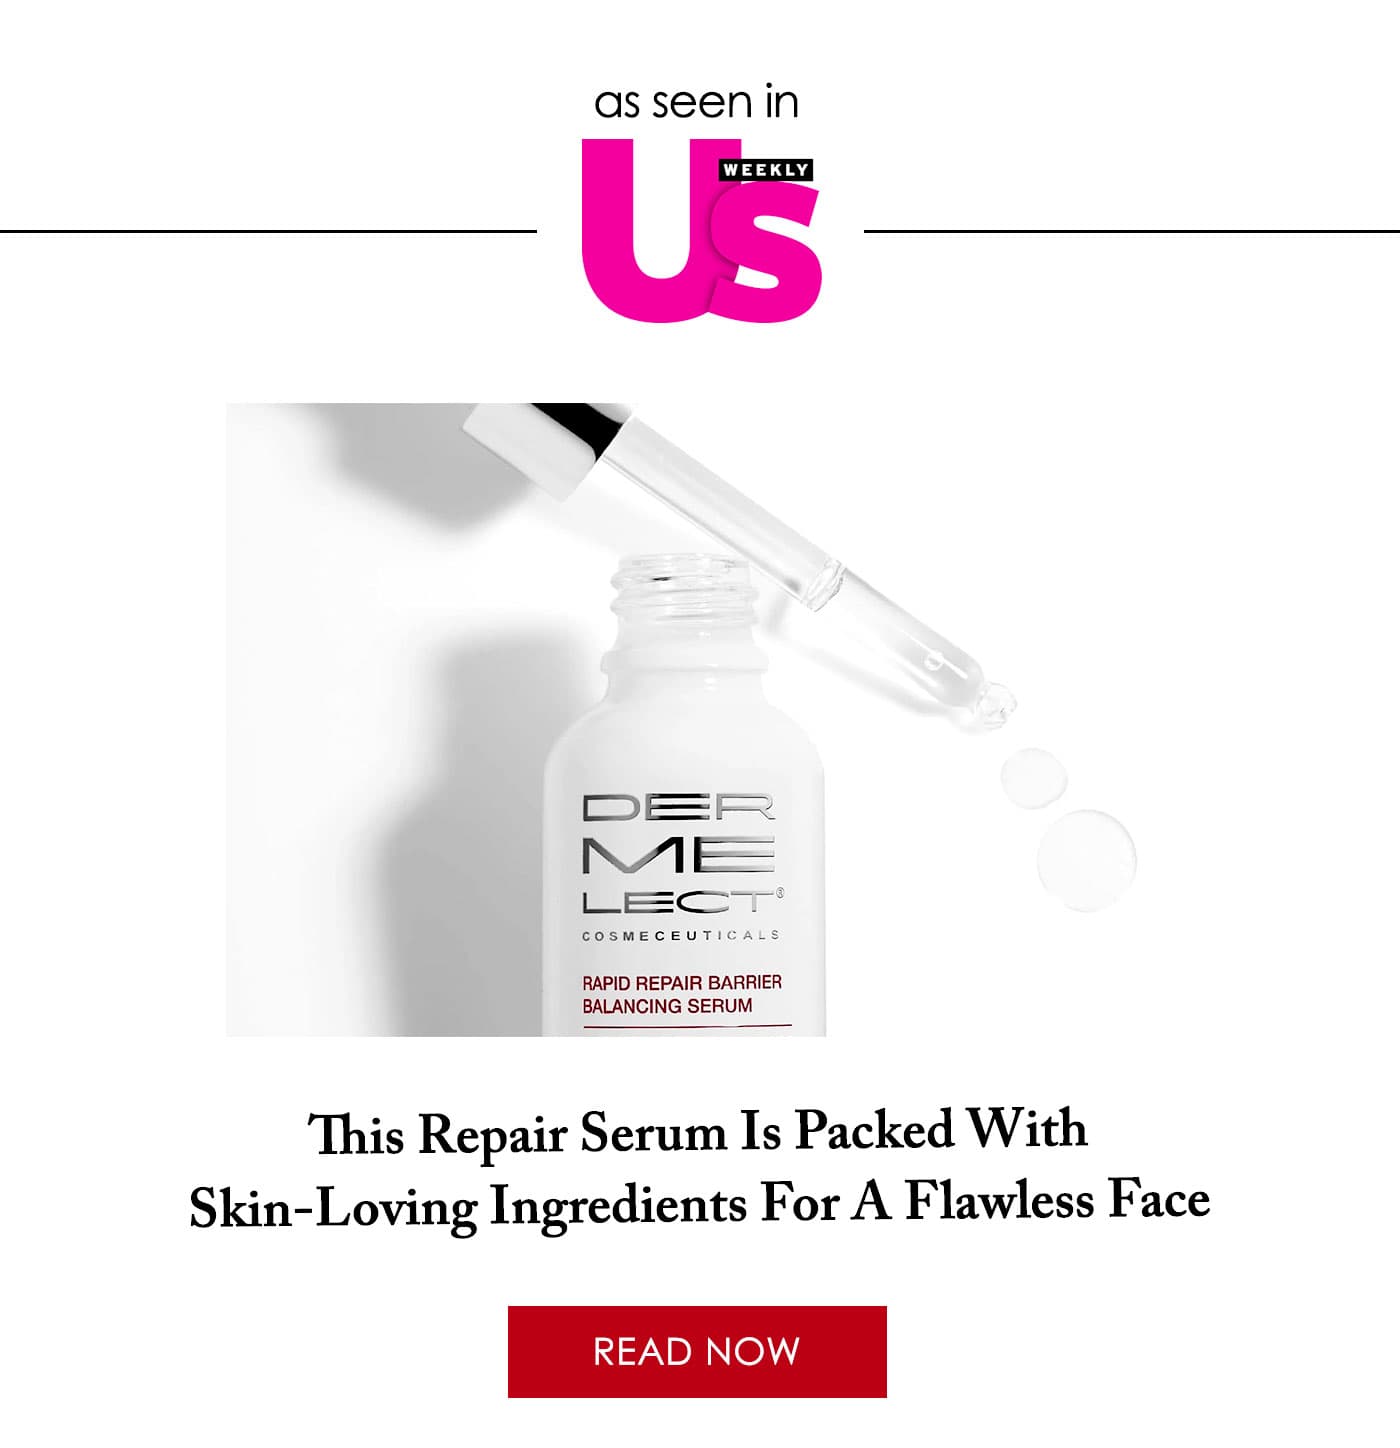 This Repair Serum Is Packed With Skin-Loving Ingredients for a Flawless Face